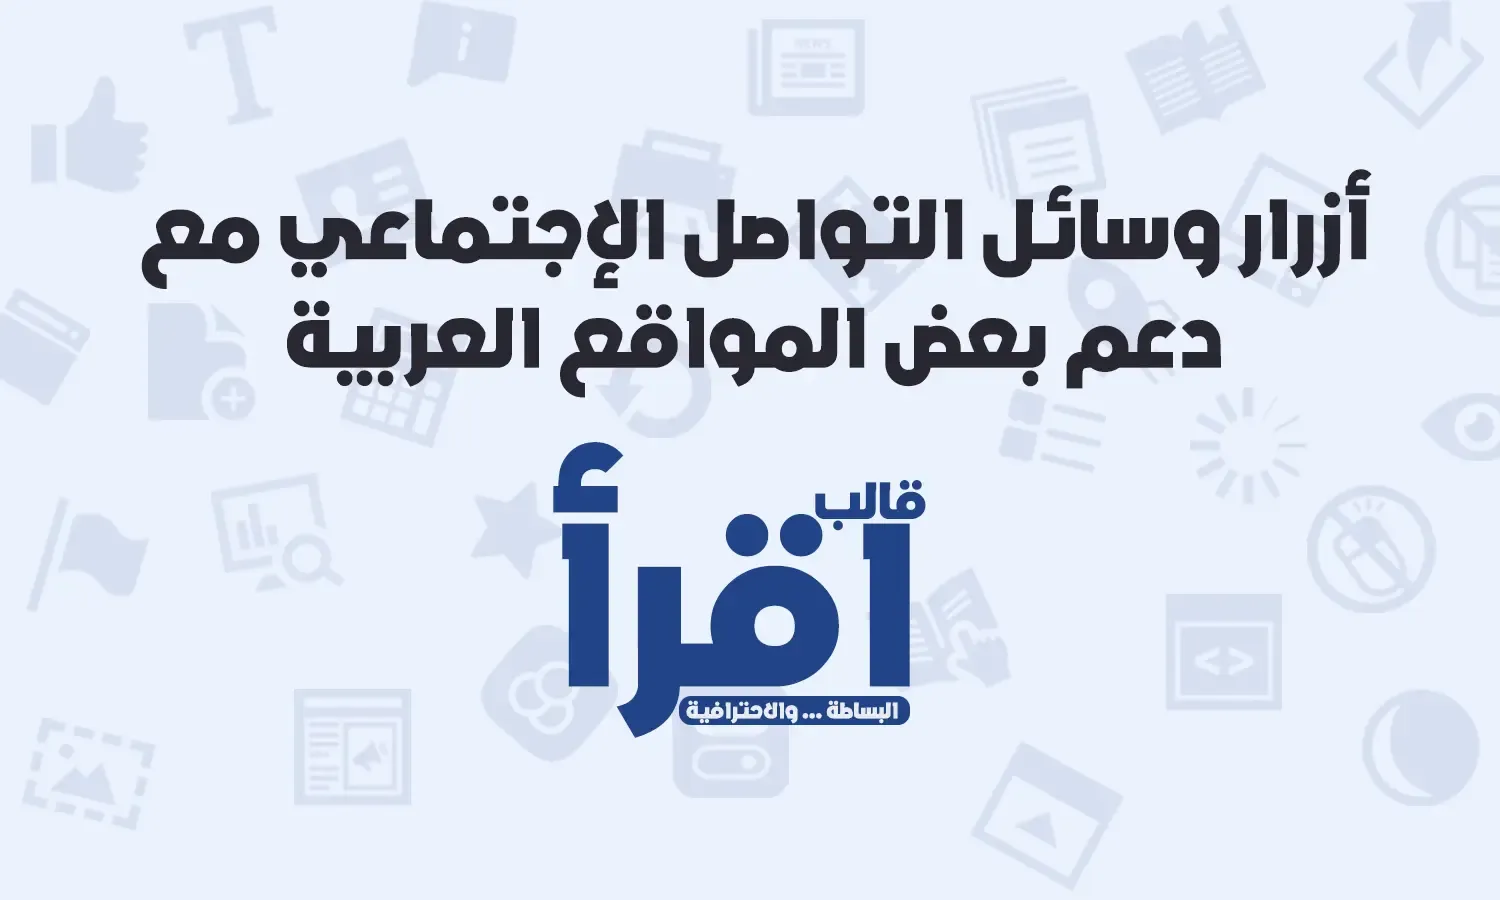 Social media buttons with support for some Arabic websites